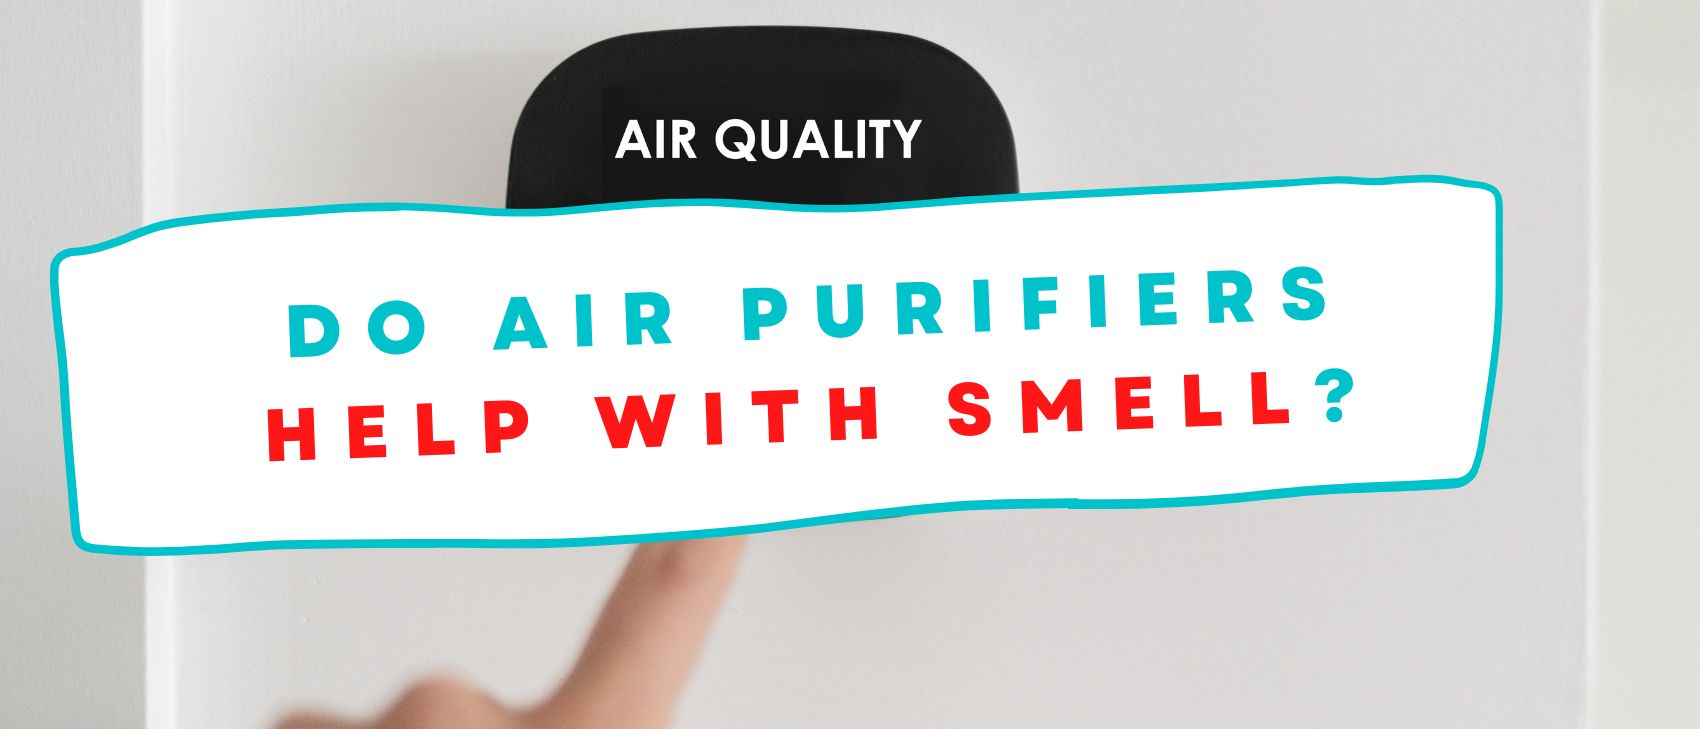 Do Air Purifiers Help with Smell?